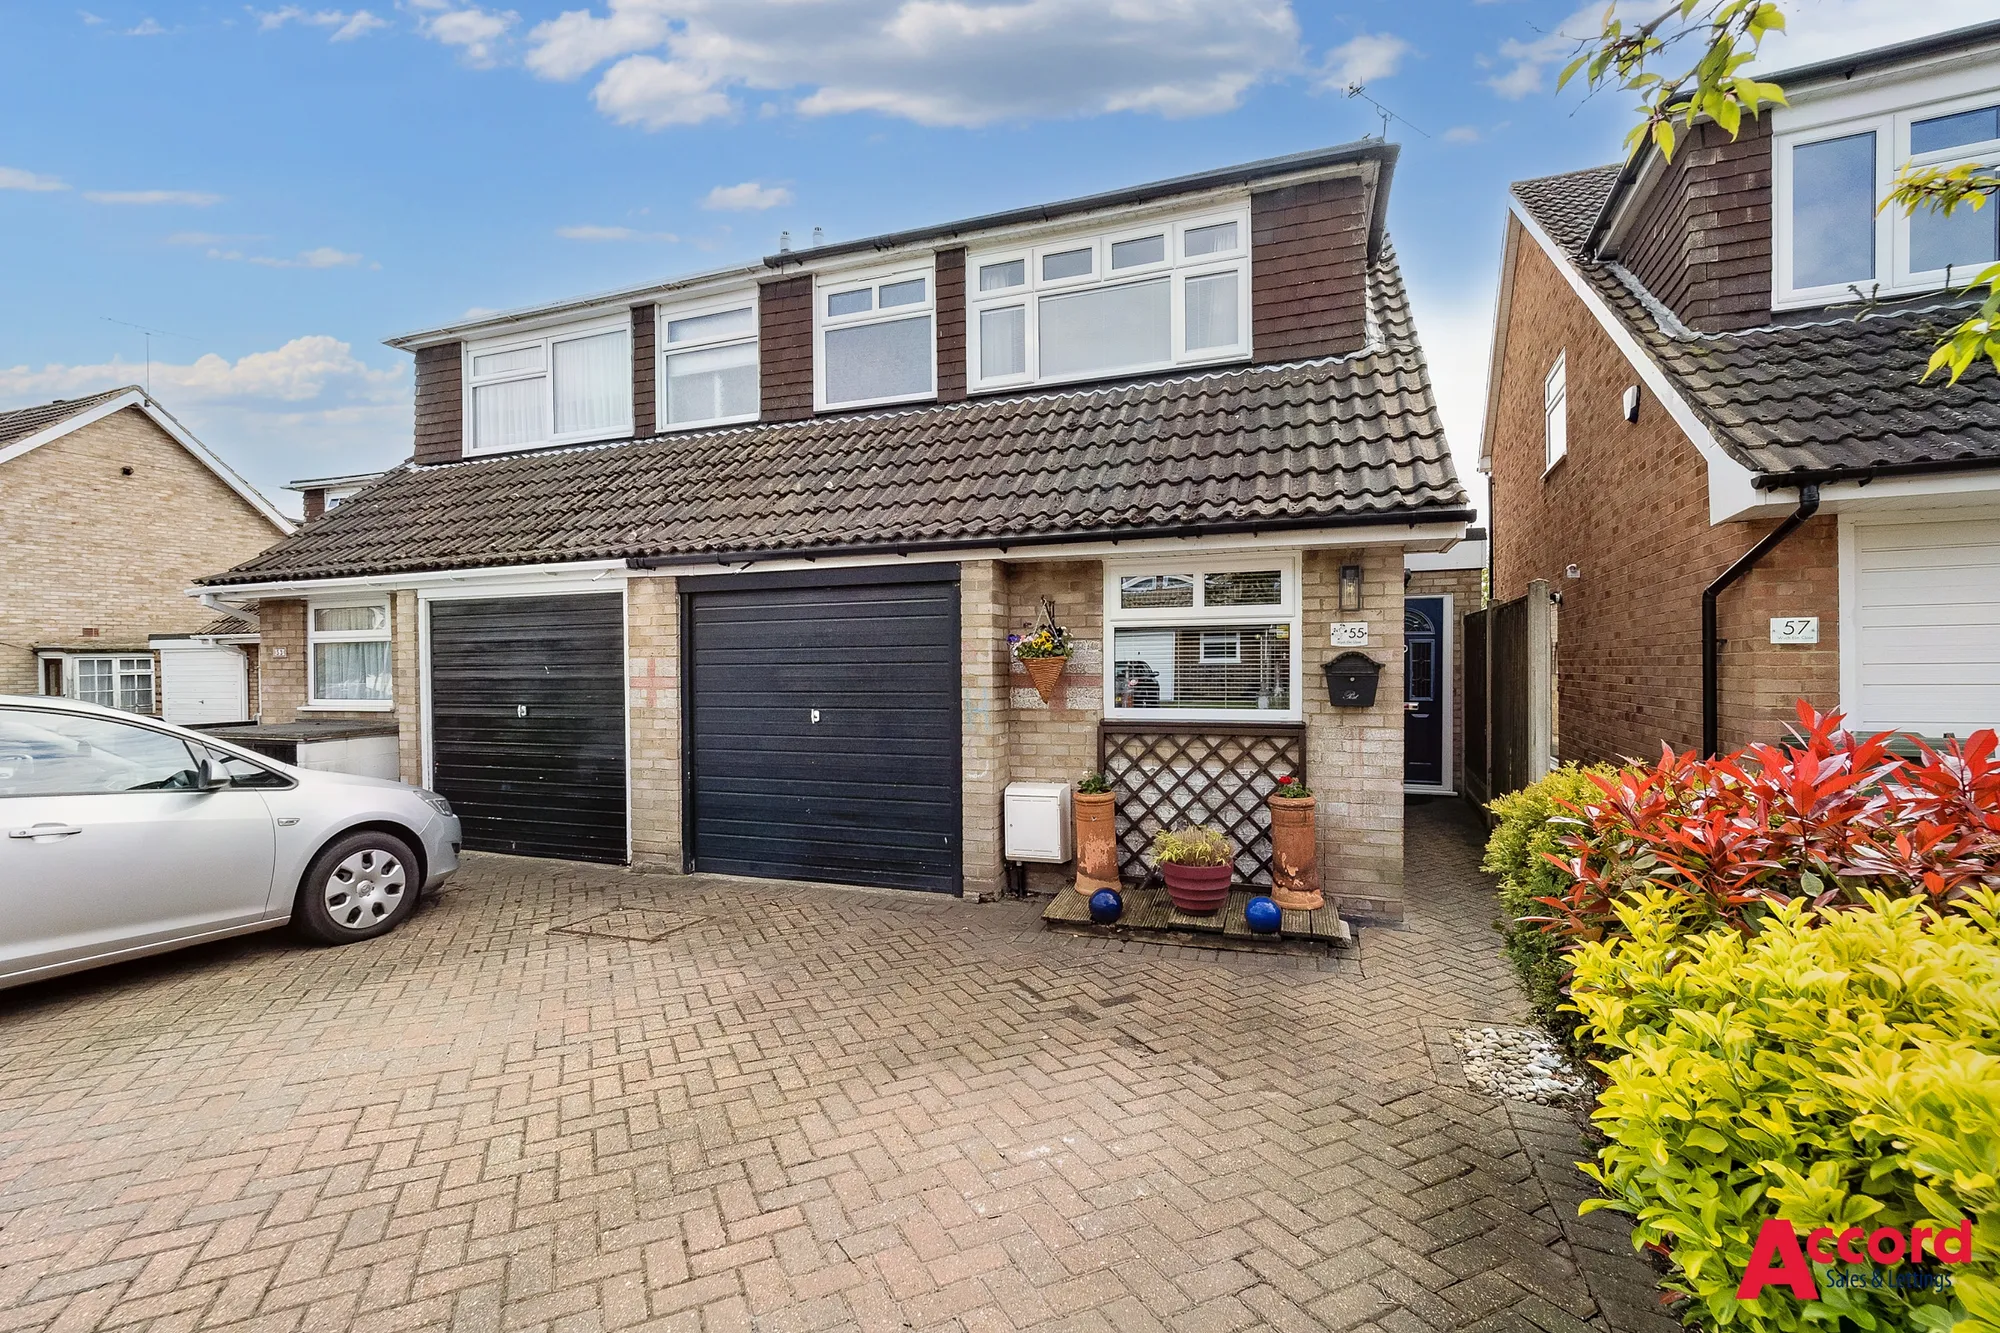 3 bed semi-detached house for sale in Wych Elm Close, Hornchurch - Property Image 1